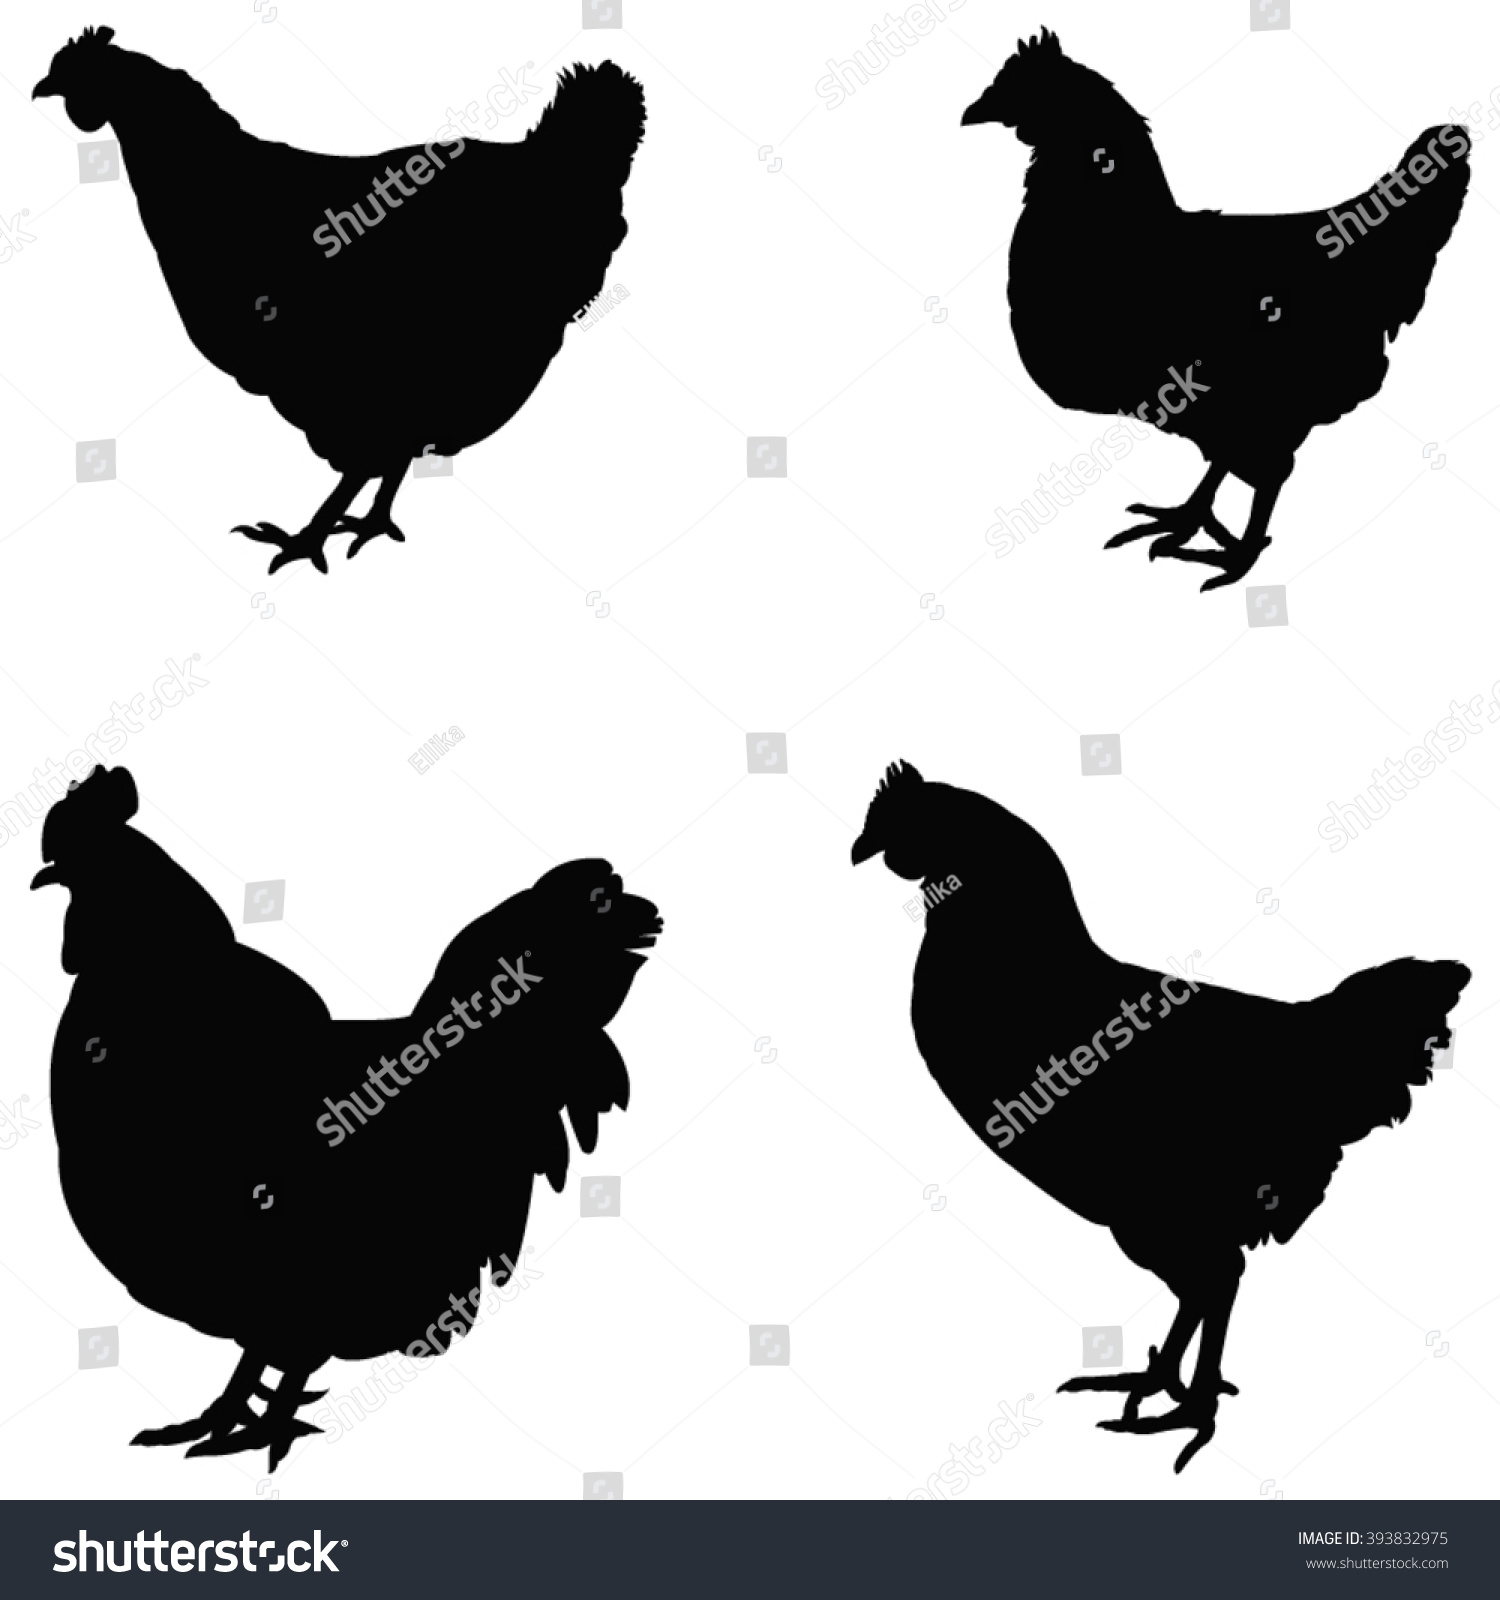 Hens Silhouette Vector Illustration Royalty Free Stock Vector 393832975 